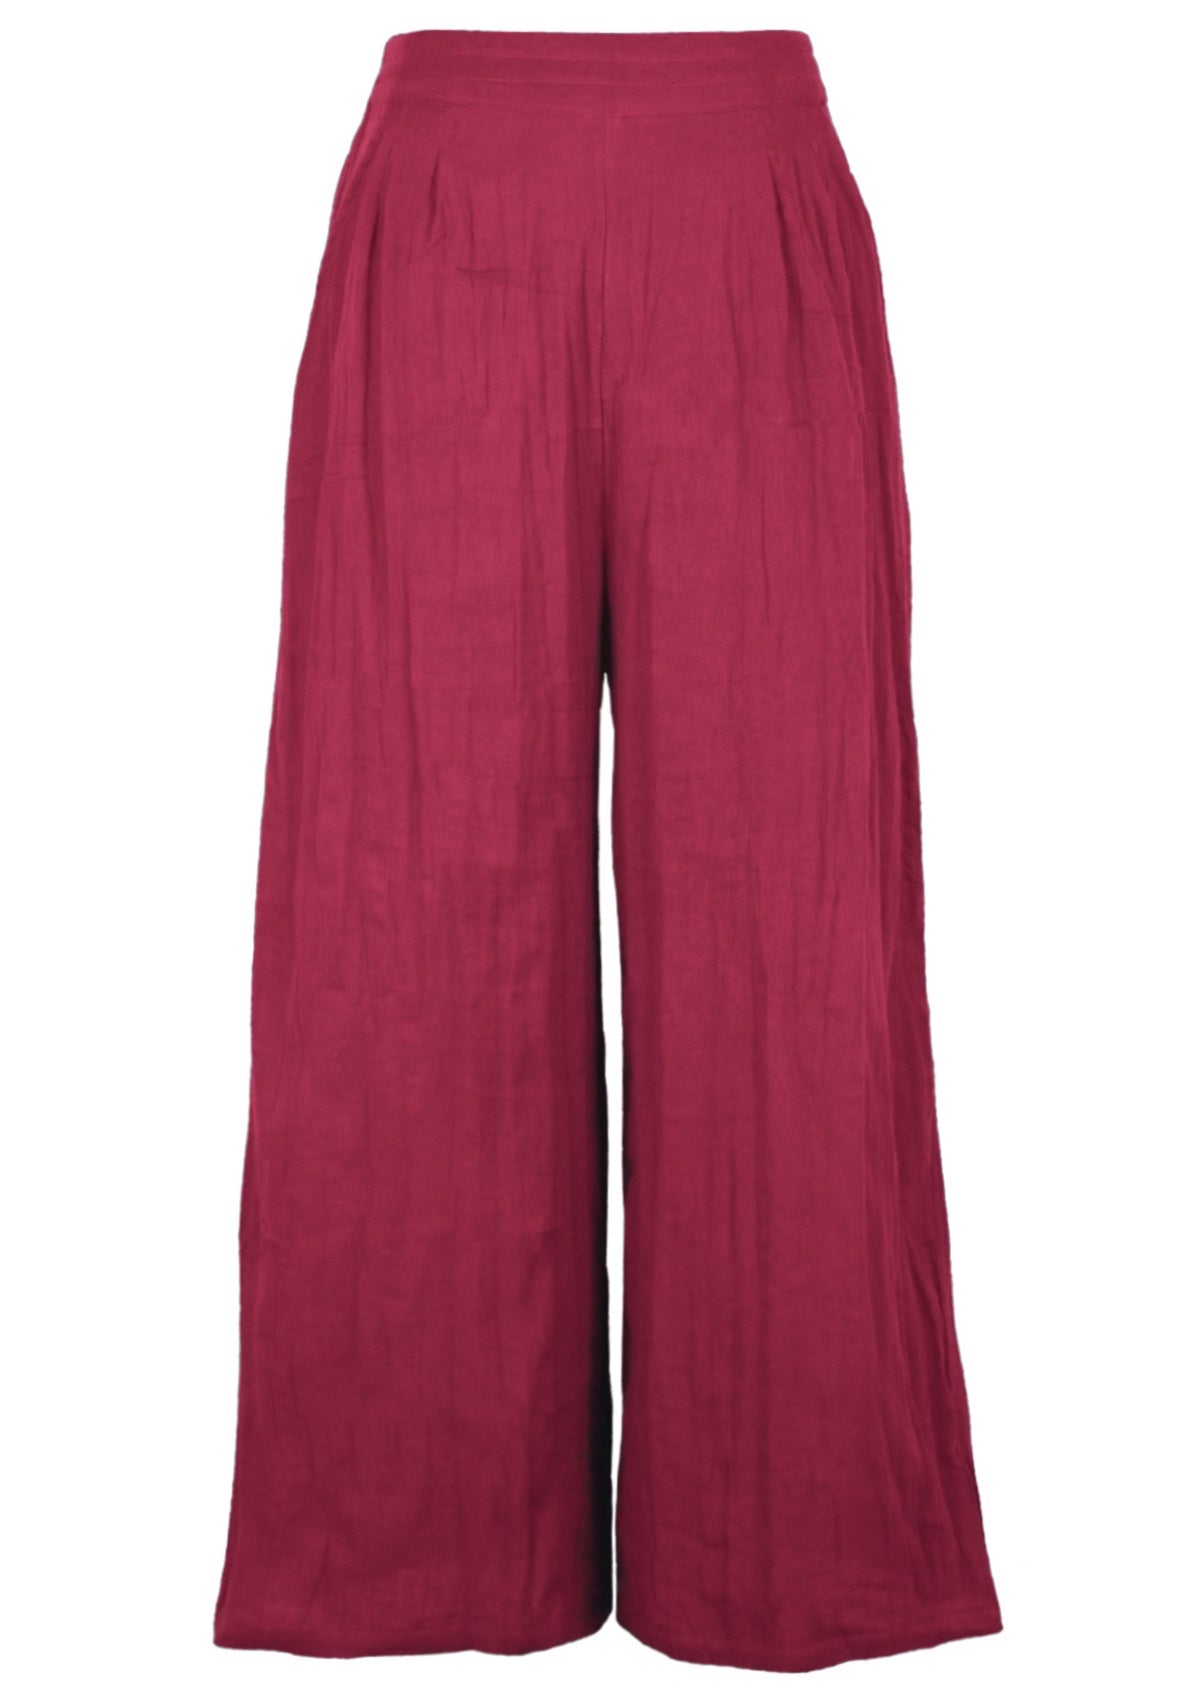 Two layers pf cotton gauze form these wide leg pants